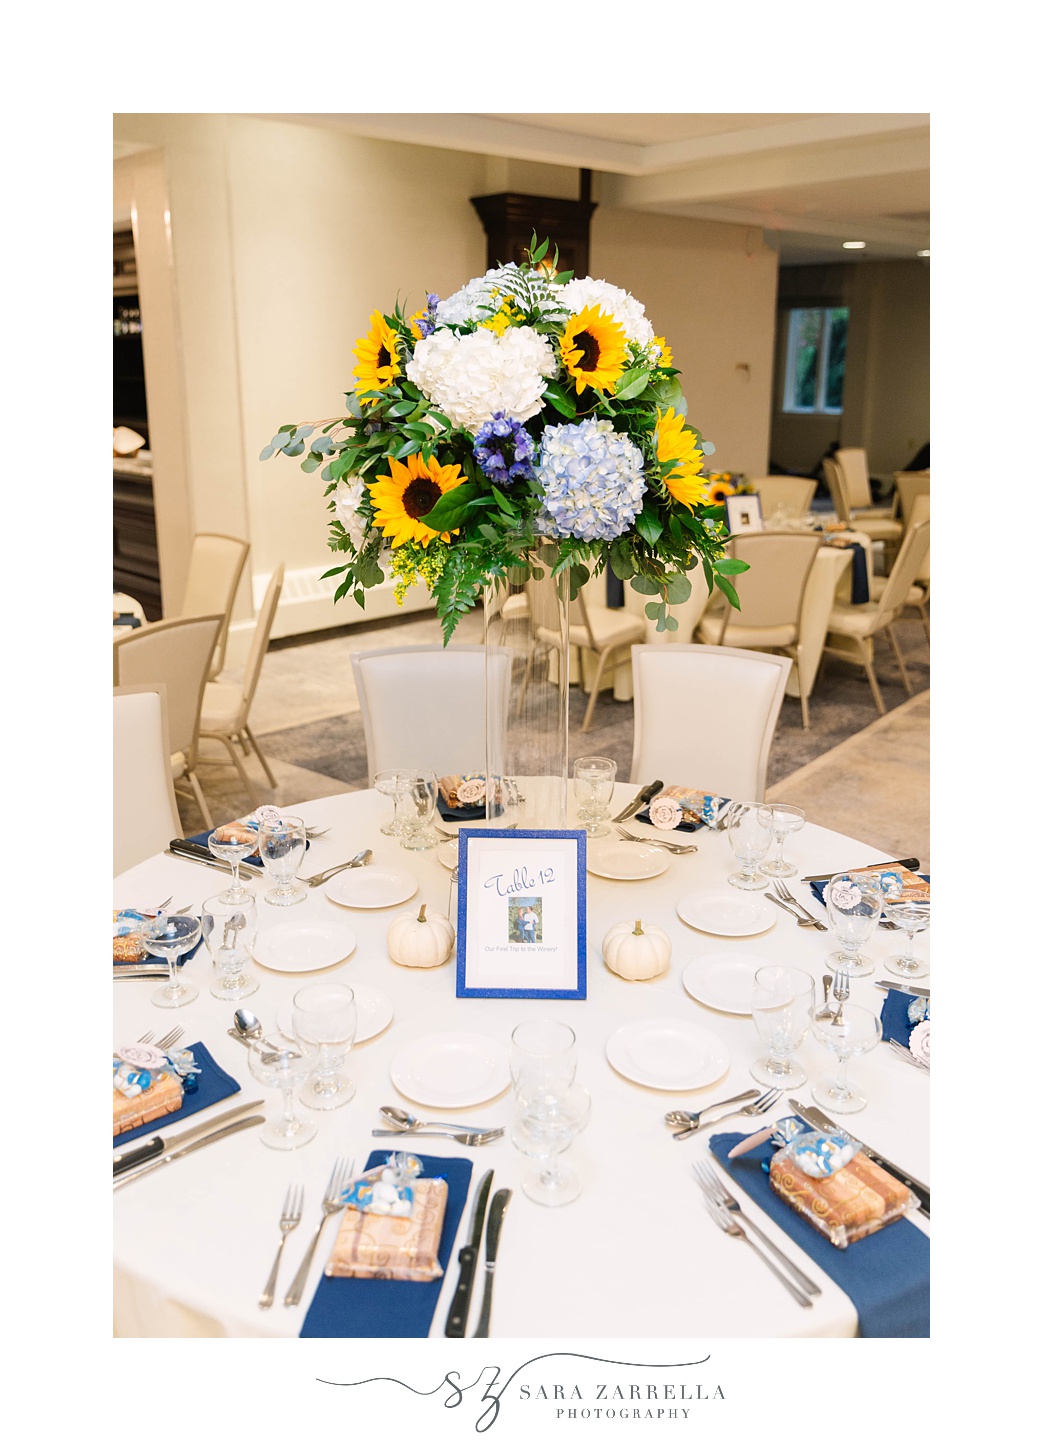 wedding centerpieces with sunflowers and blue napkins